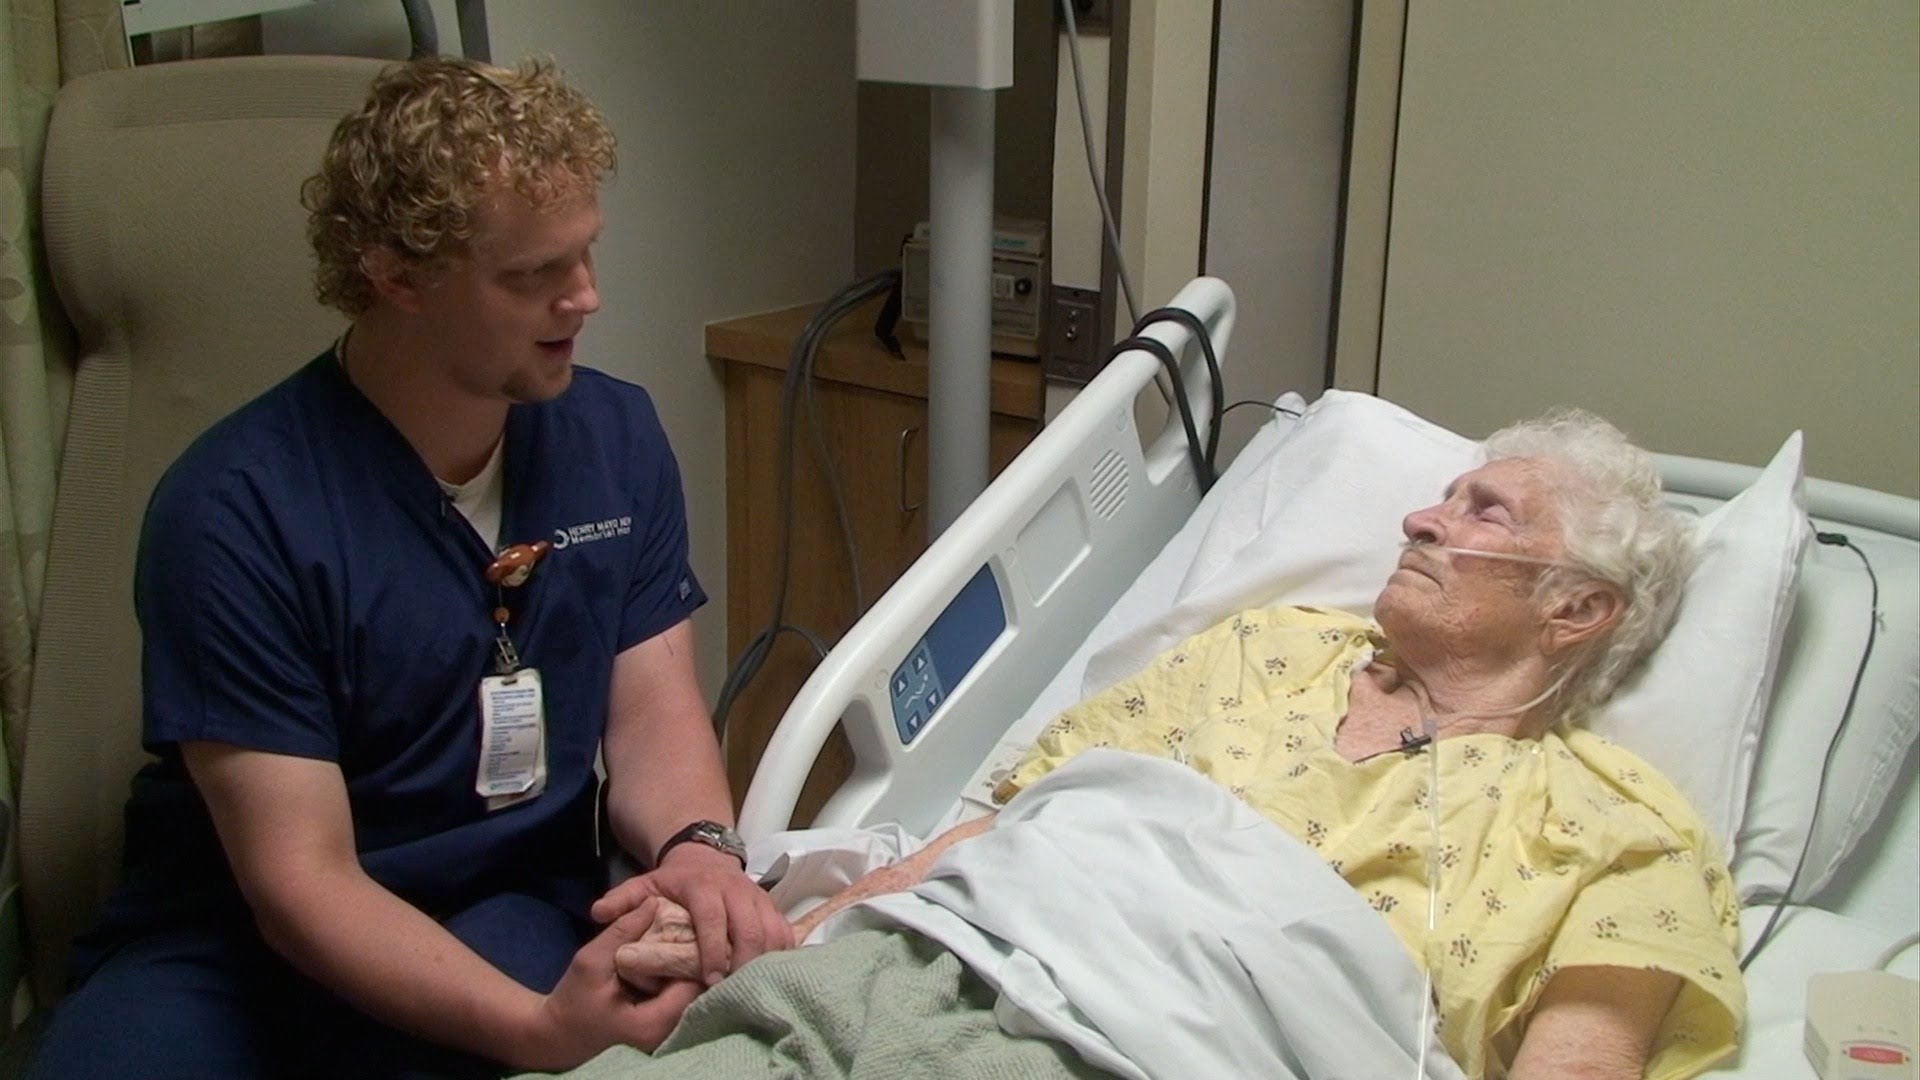 What This Male Nurse Does For His Older Patients Will Leave You In Tears Faith In Humanity